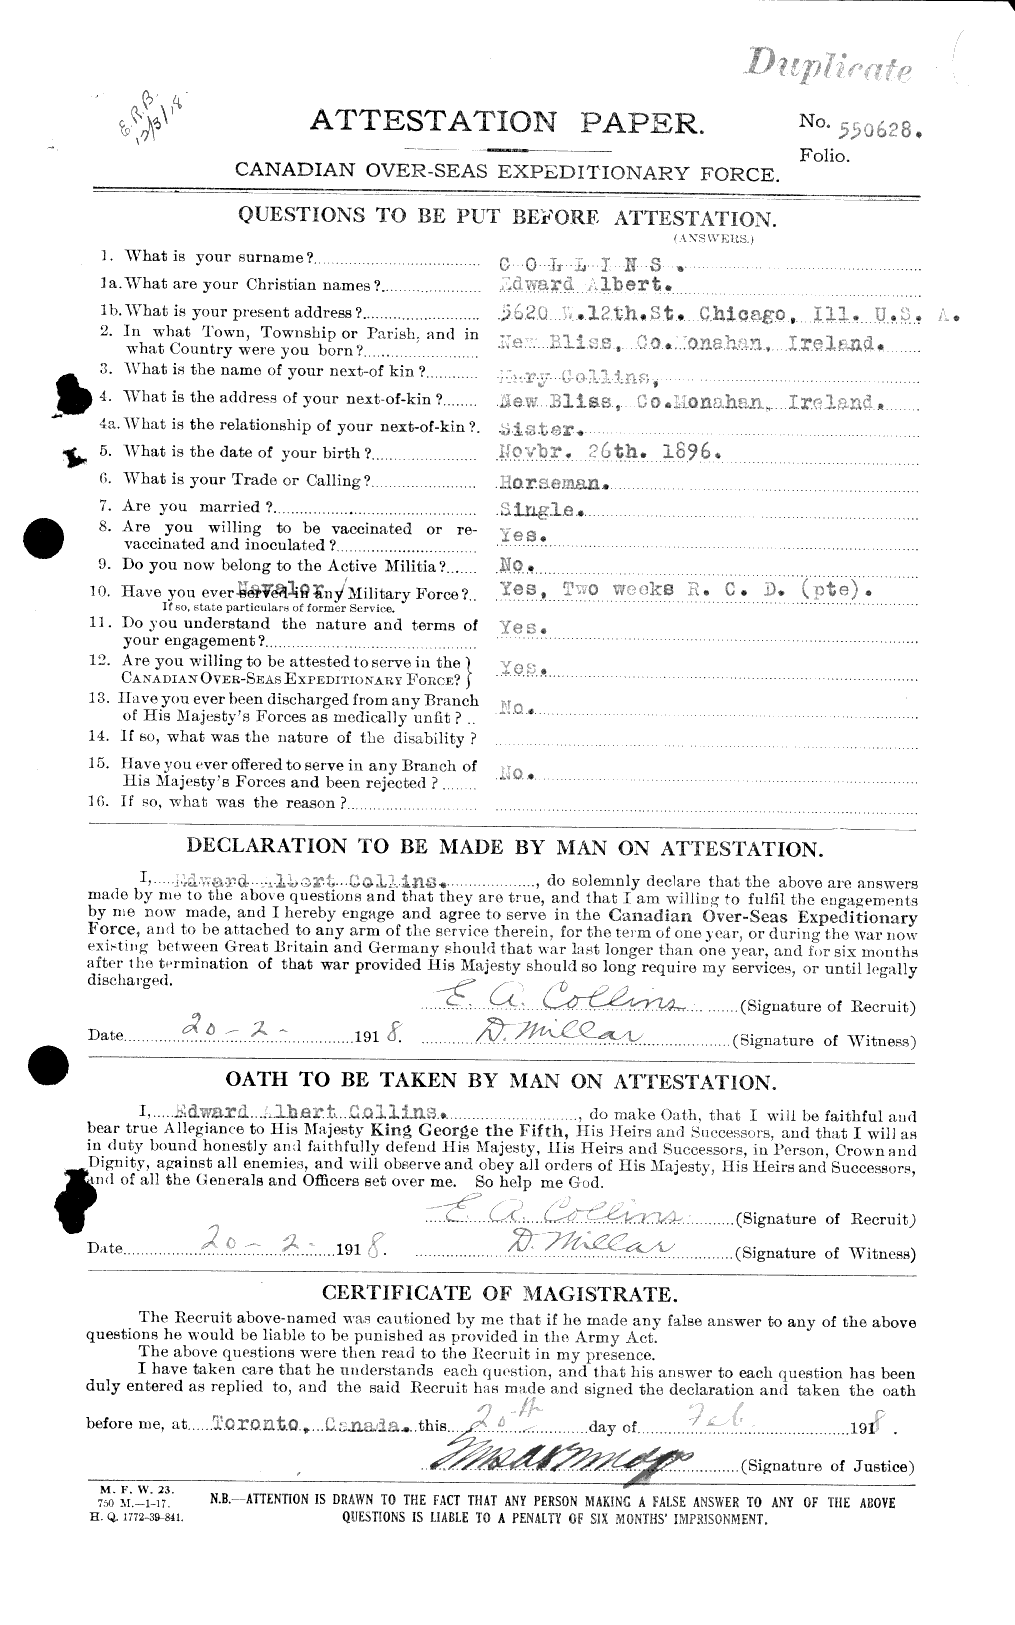 Personnel Records of the First World War - CEF 037745a